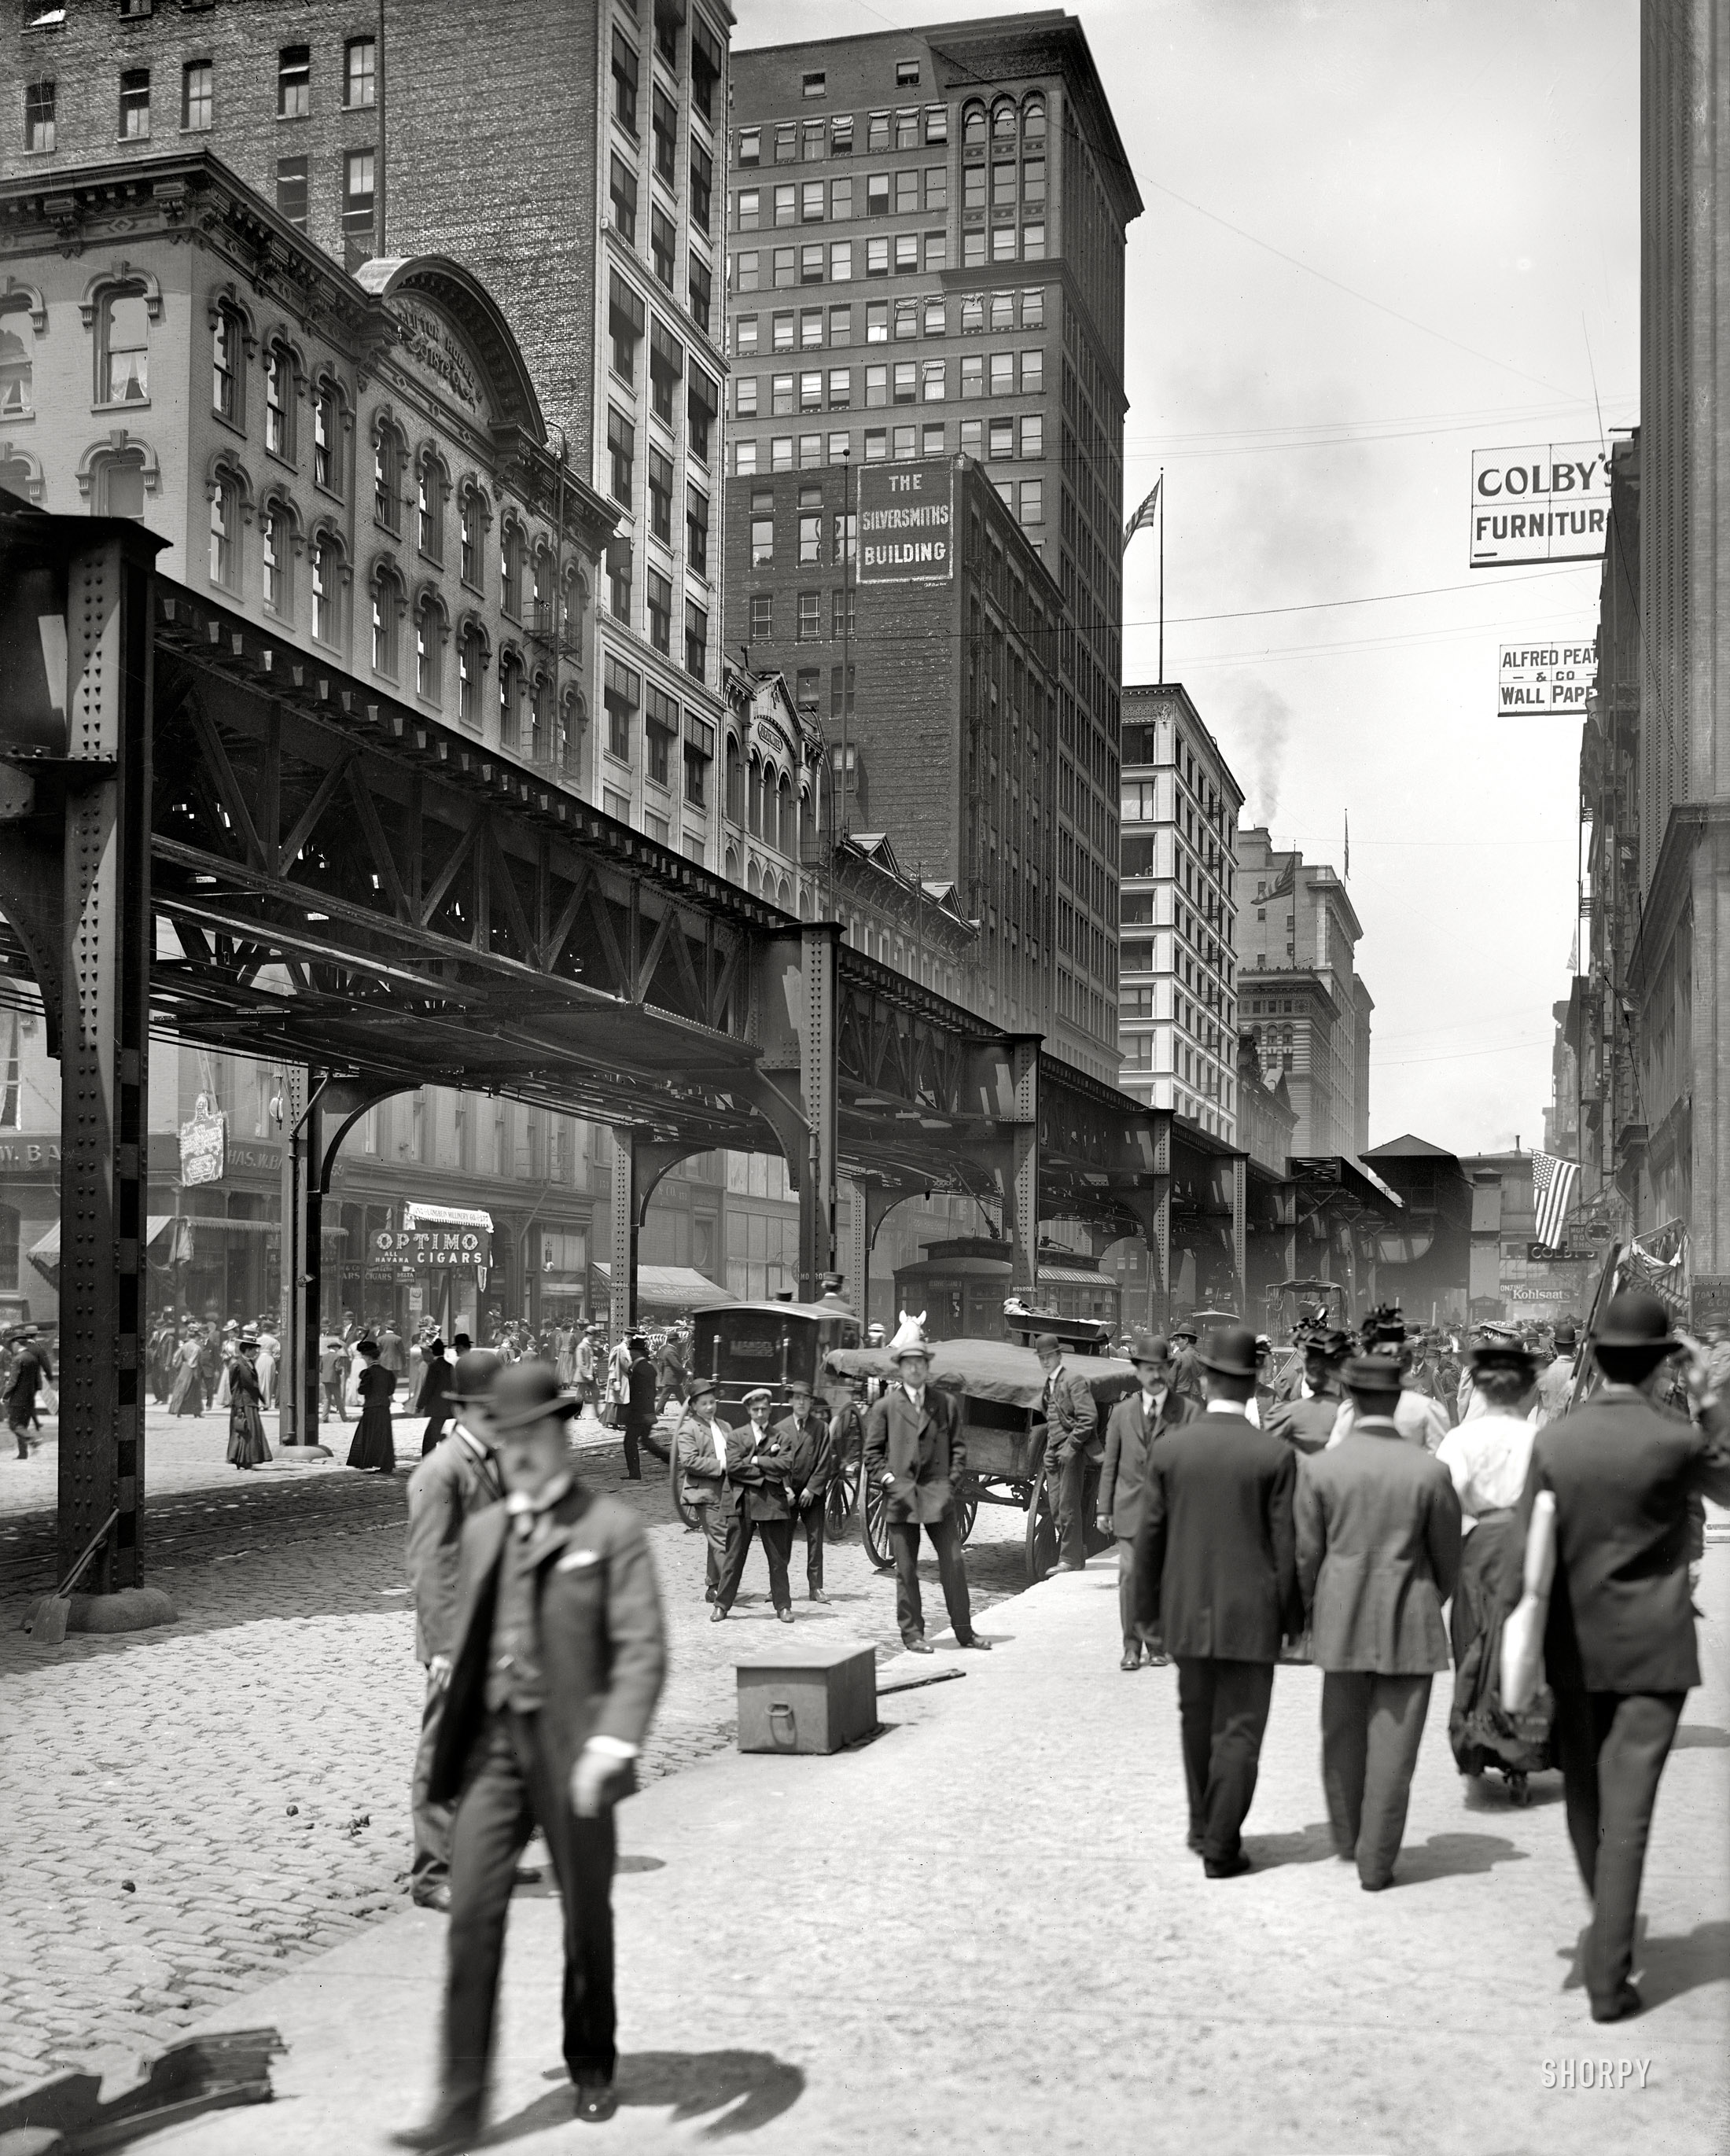 Chicago, Illinois, circa 1907. "Wabash Avenue and elevated tracks." 8x10 inch glass negative by Hans Behm, Detroit Publishing Company. View full size.